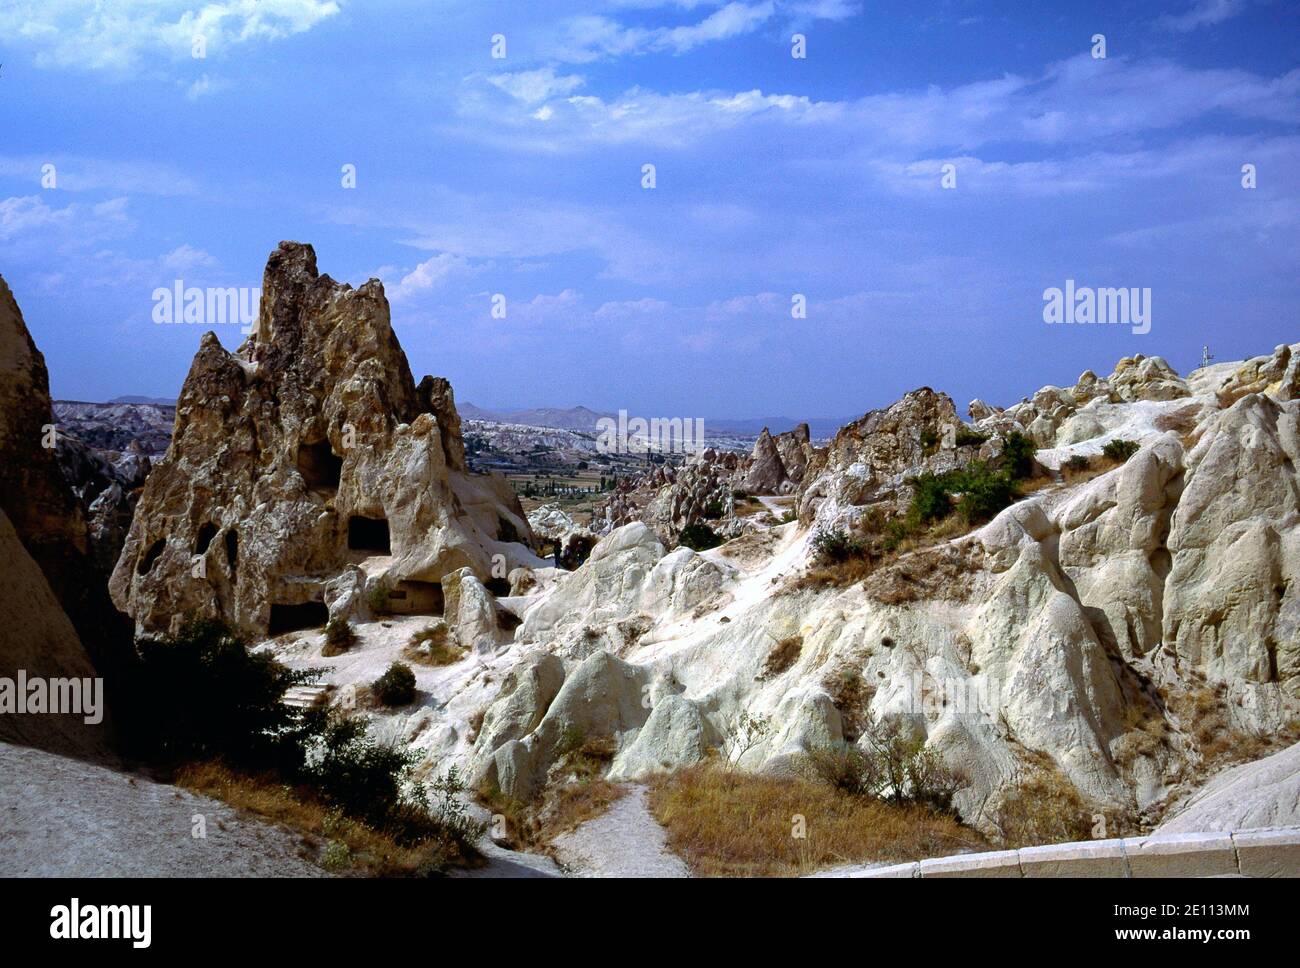 Zelve, Cappadocia, Turkey: rock and lava formations shaped by wind and rain erosion Stock Photo